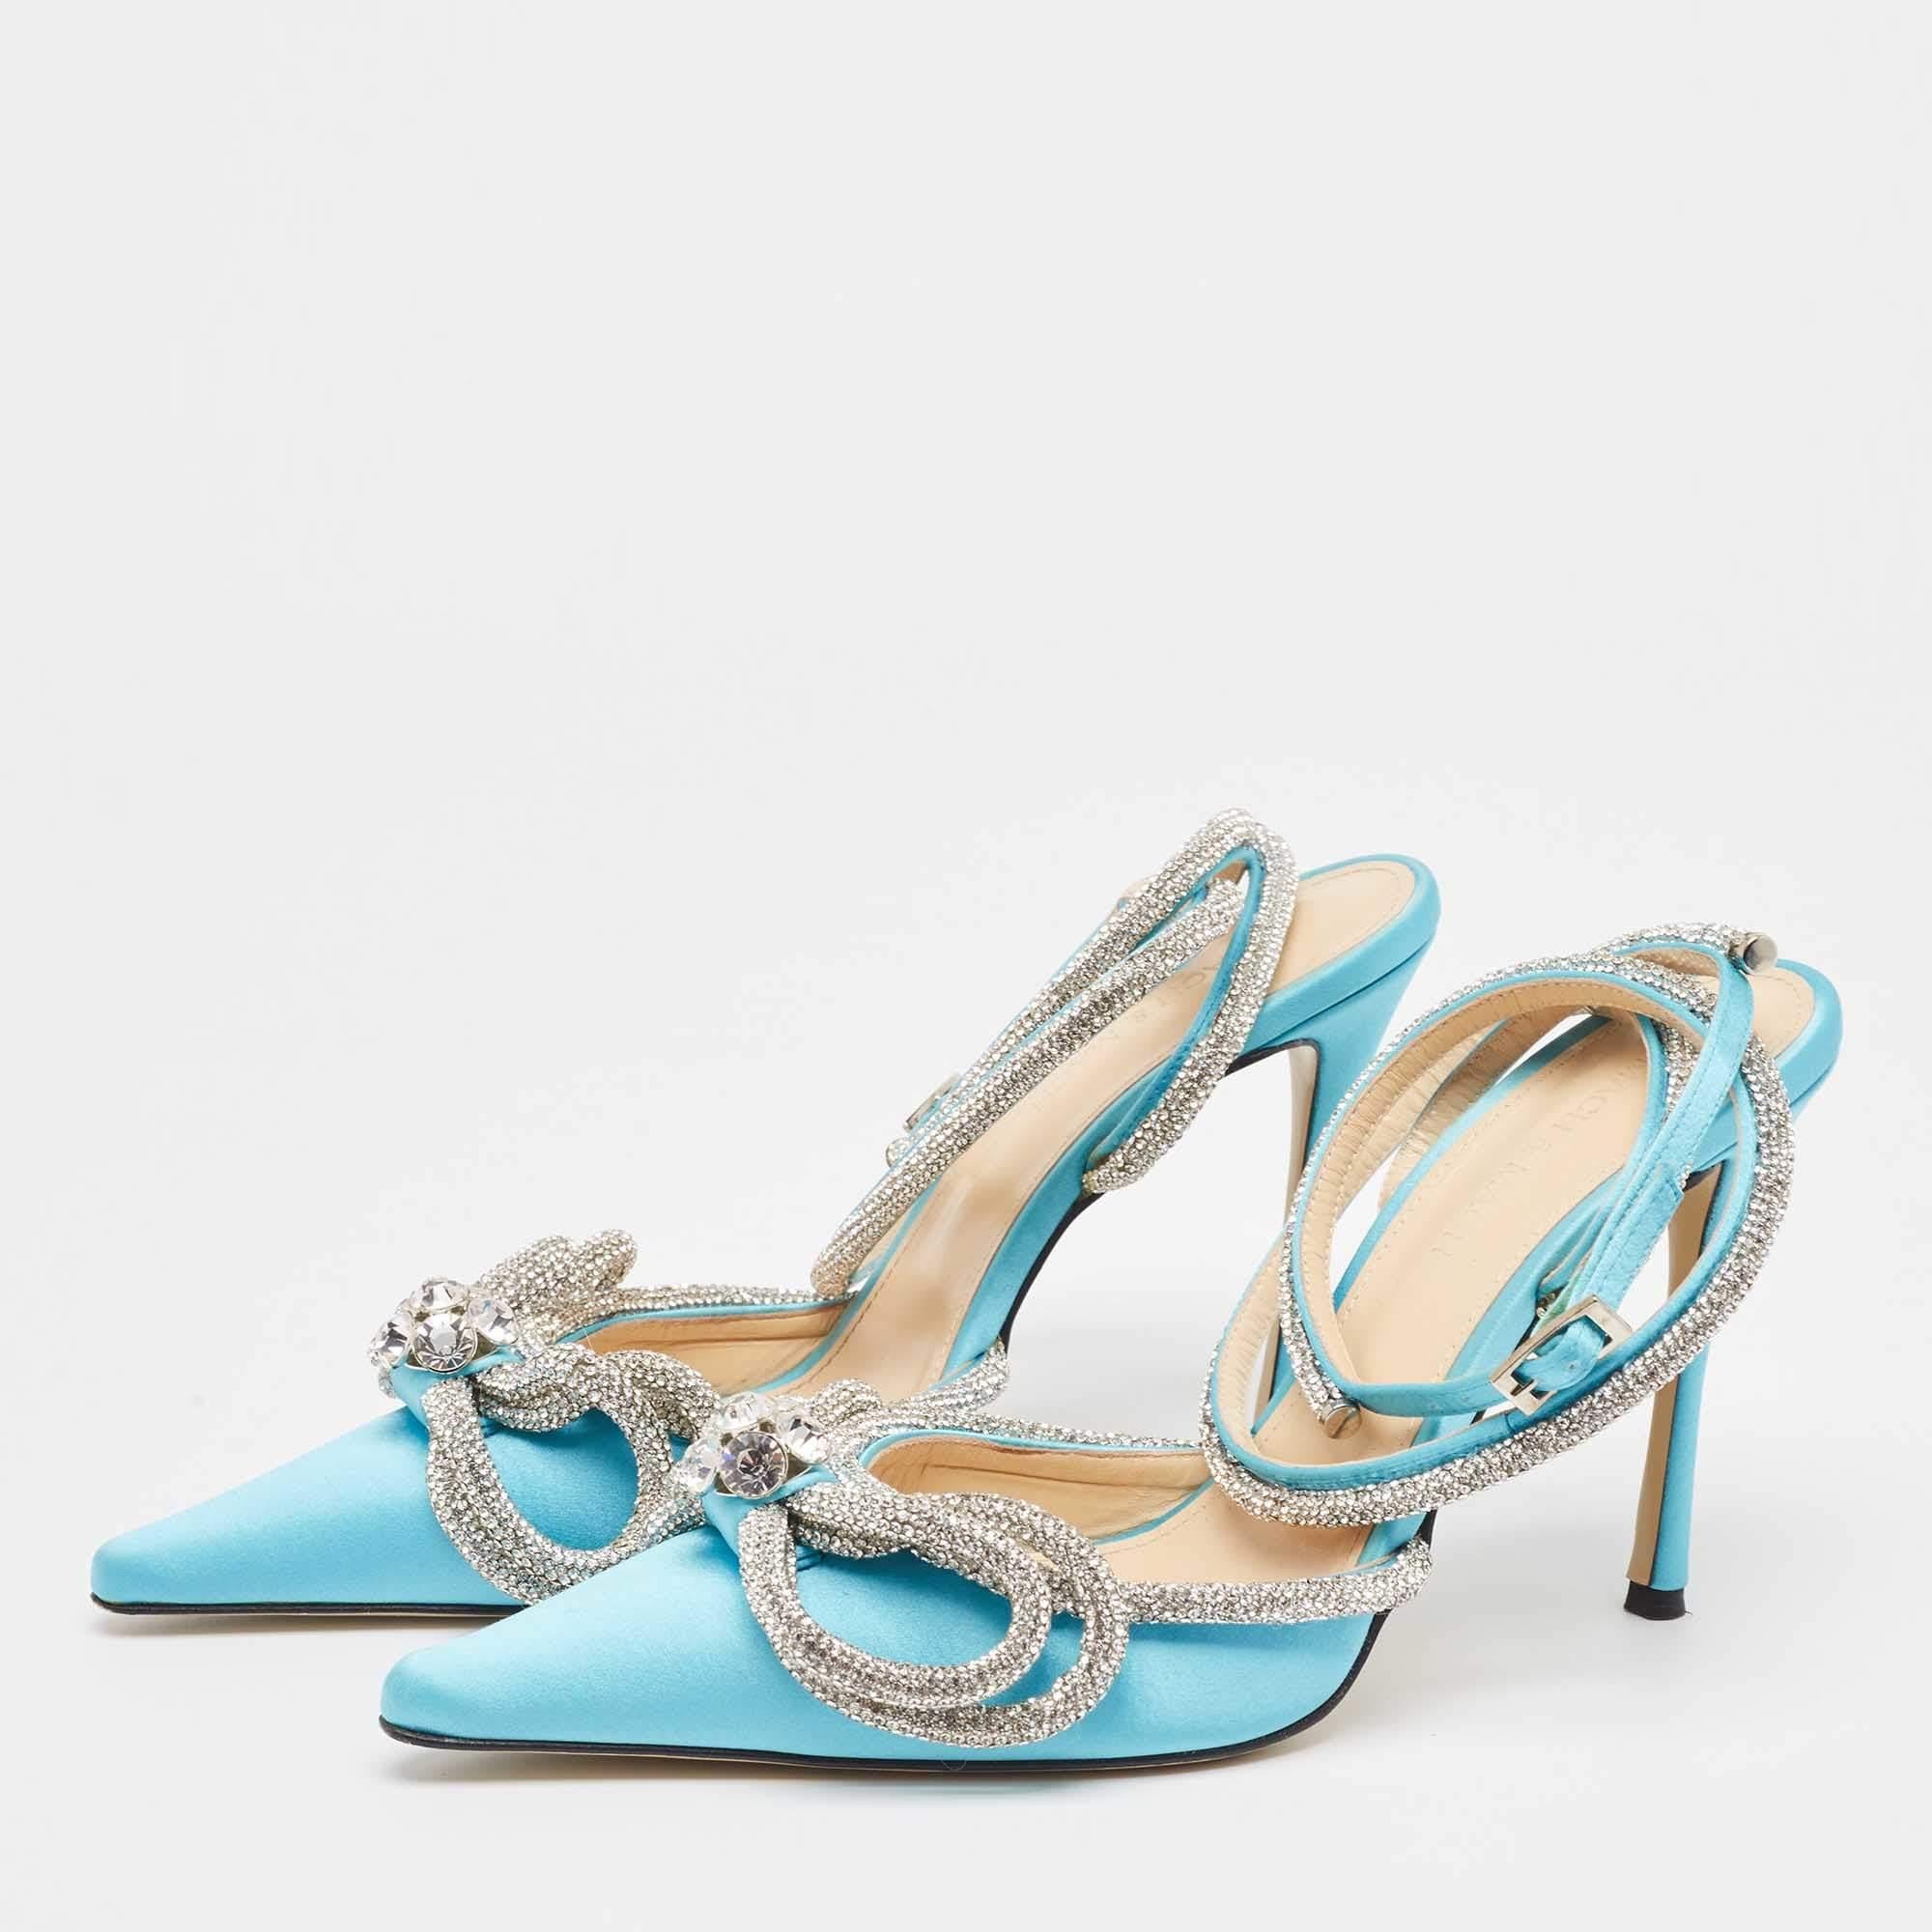 Mach & Mach Blue Satin Crystal Embellished Double Bow Pumps Size 39 In Good Condition For Sale In Dubai, Al Qouz 2